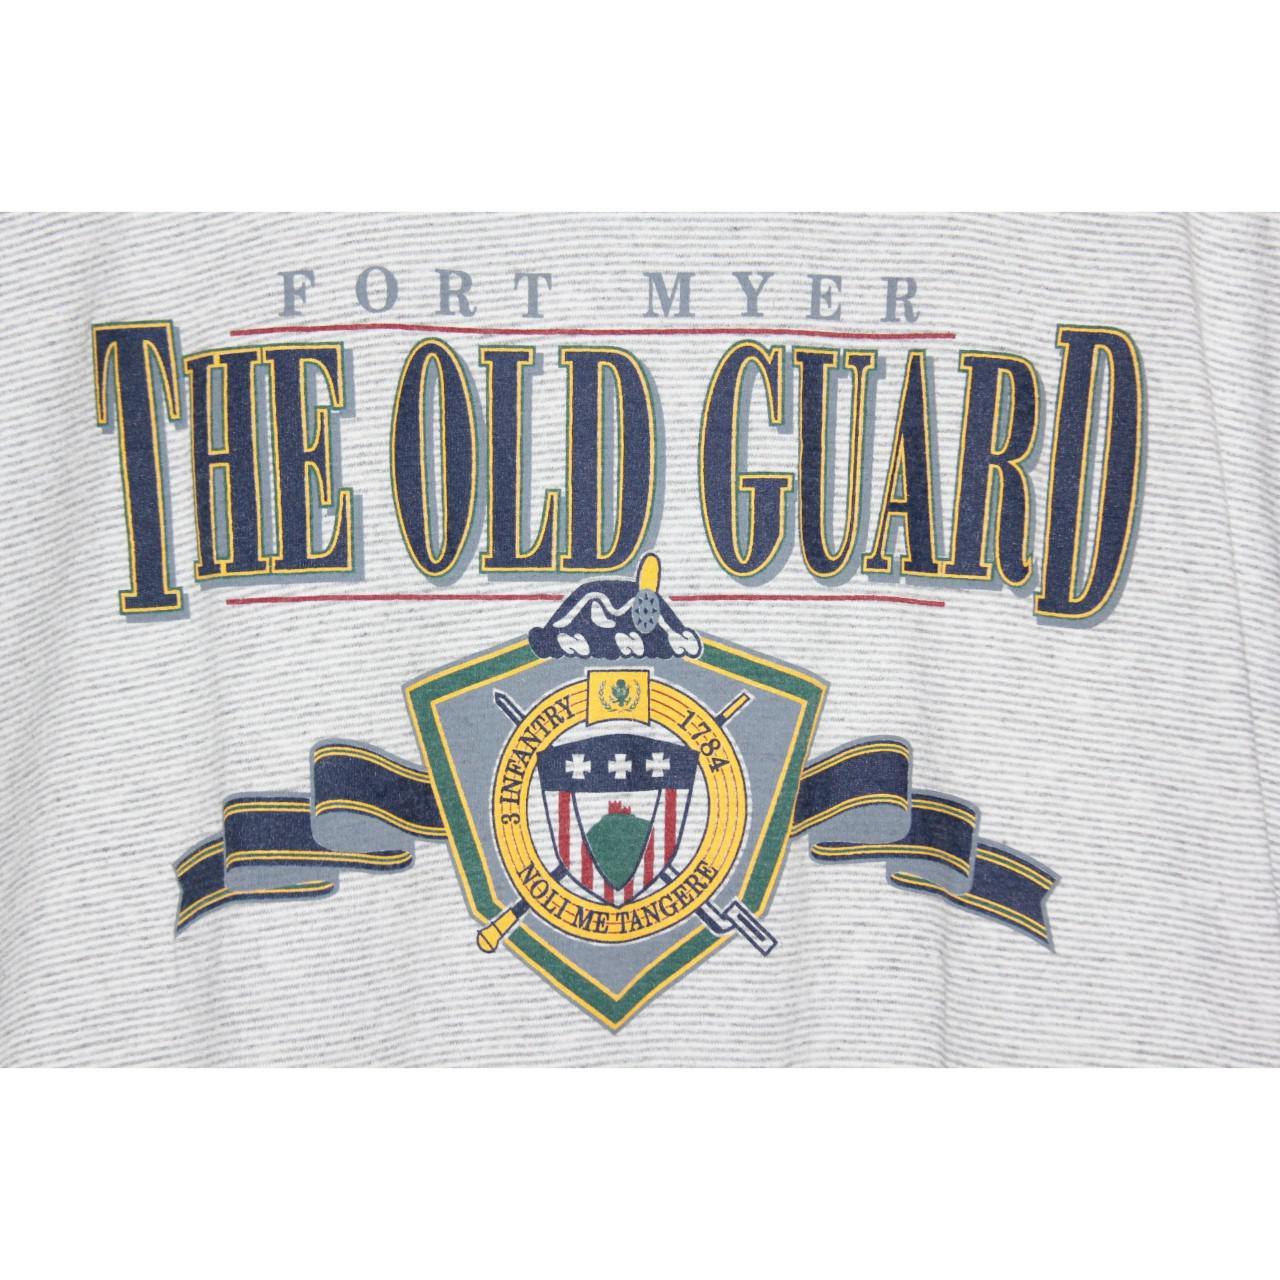 Product Image 2 - Vintage Fort Myers Tee
Sz. Large
Condition